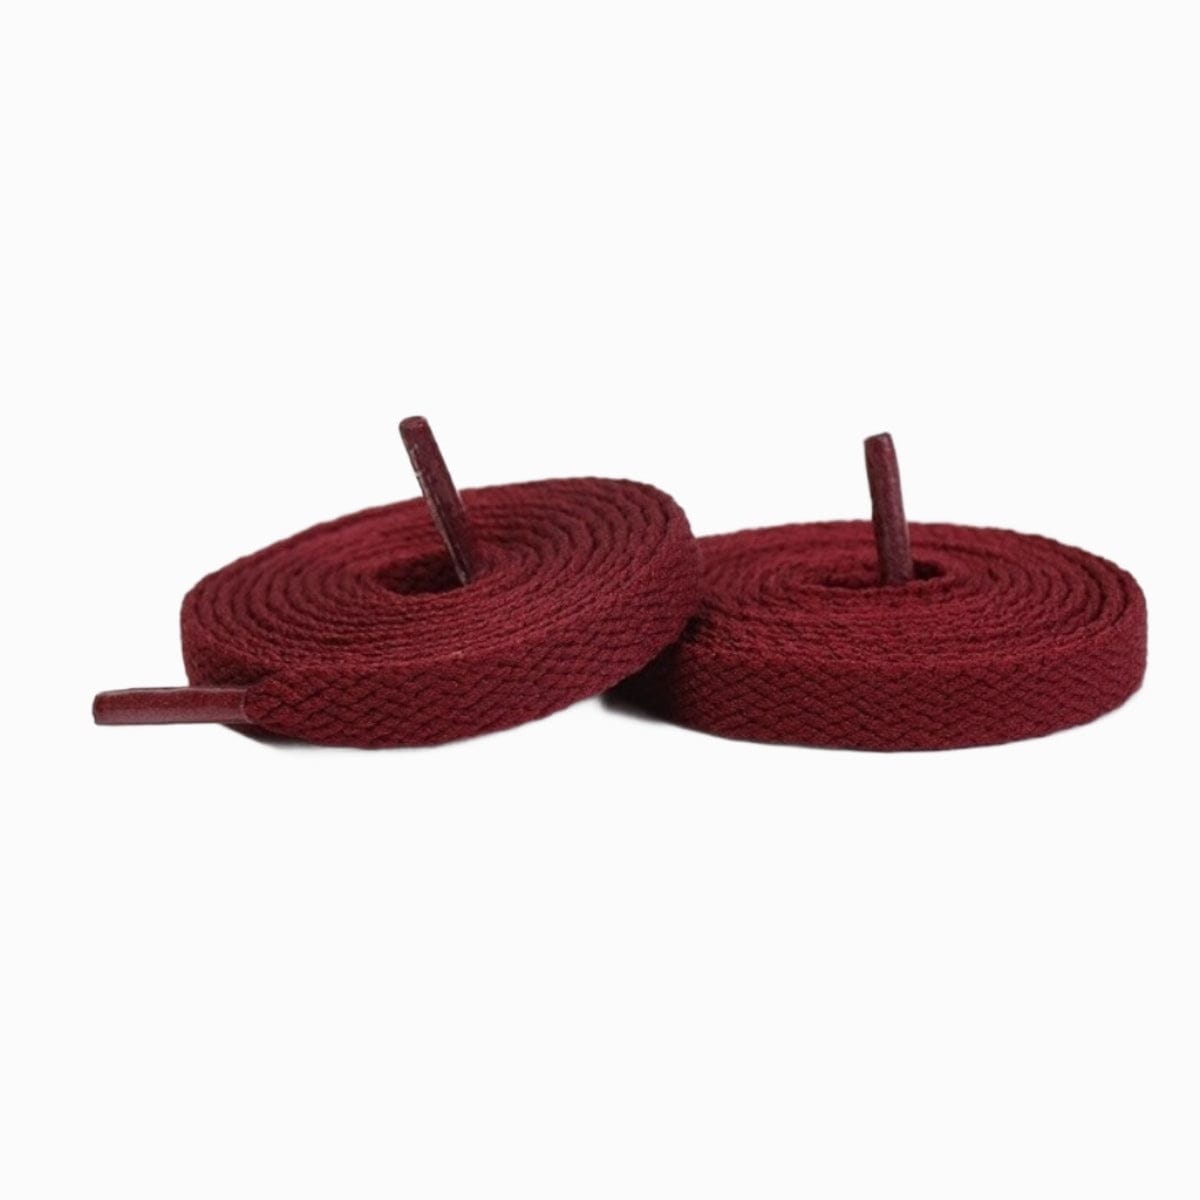 Wine Red Replacement Adidas Shoe Laces for Adidas Handball Spezial Sneakers by Kicks Shoelaces